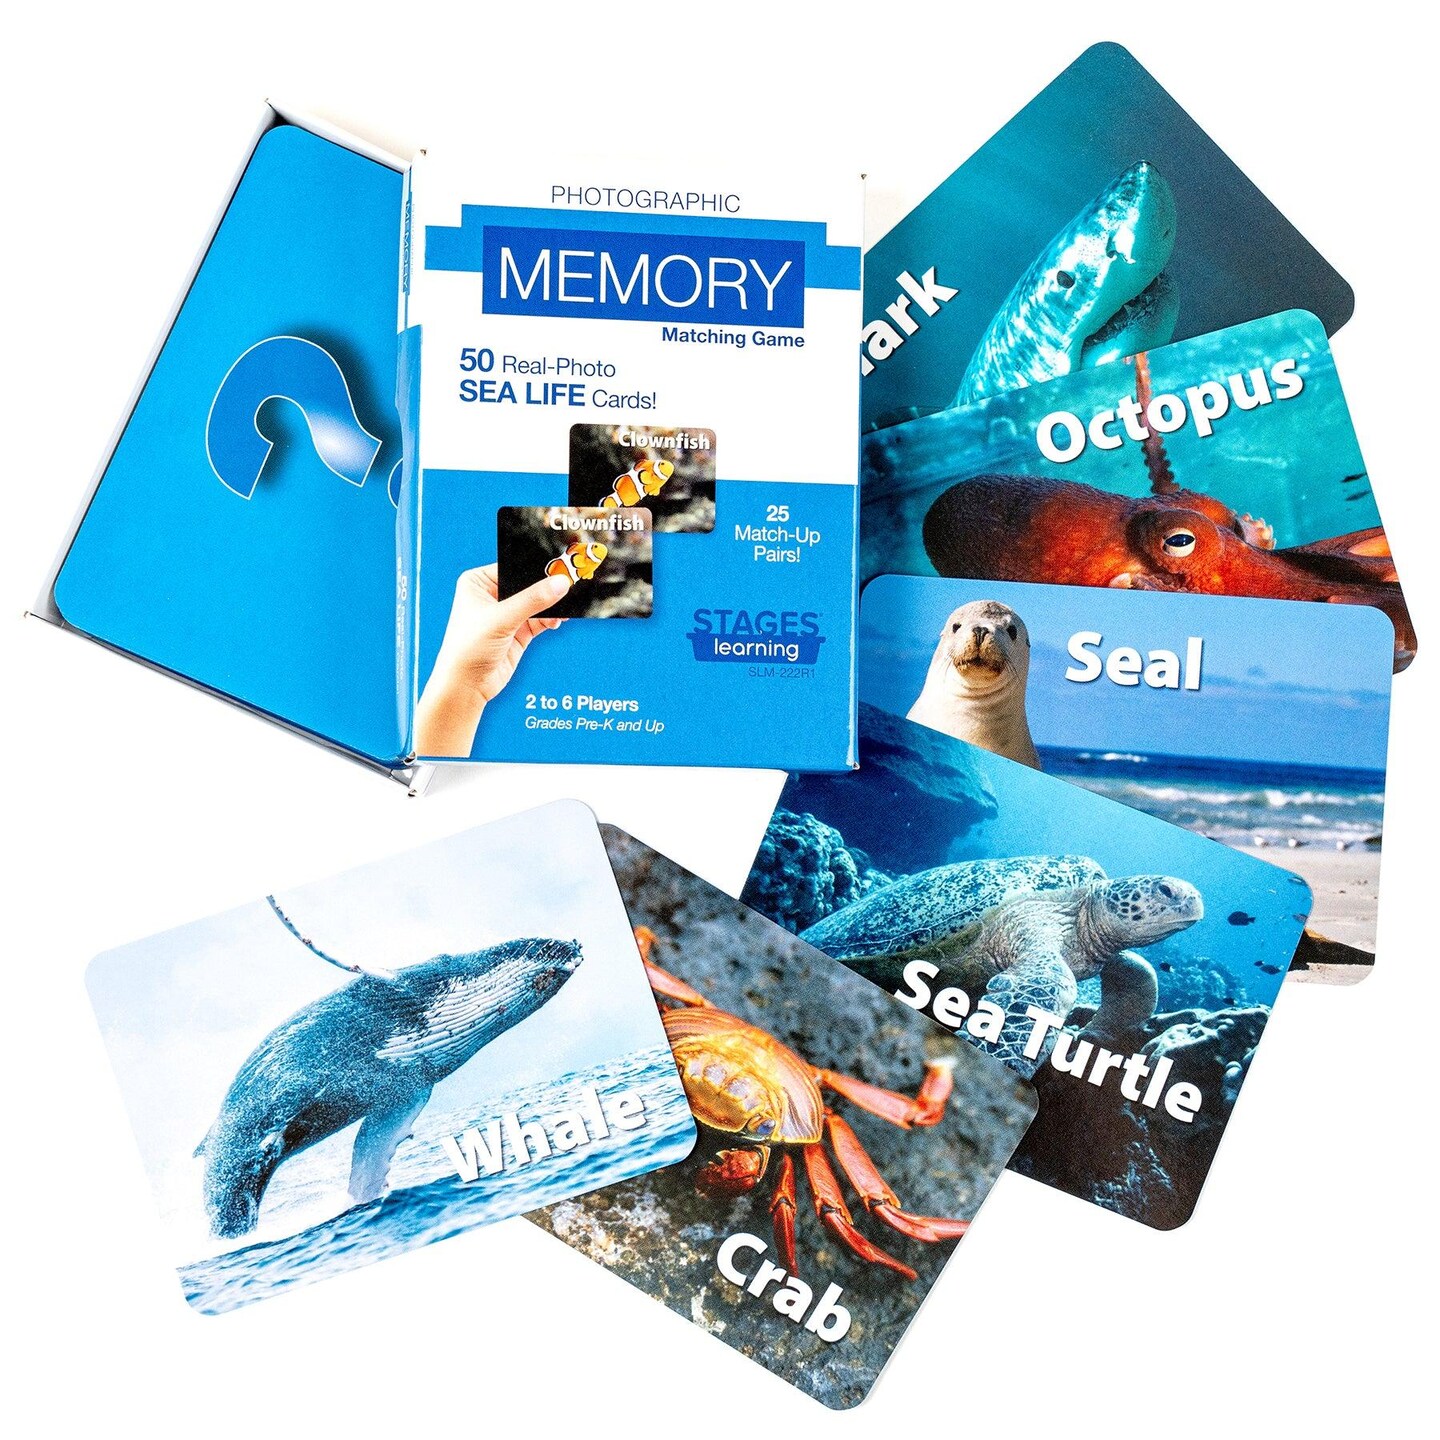 Photographic Memory Matching Game, Sea Life, Pack of 3